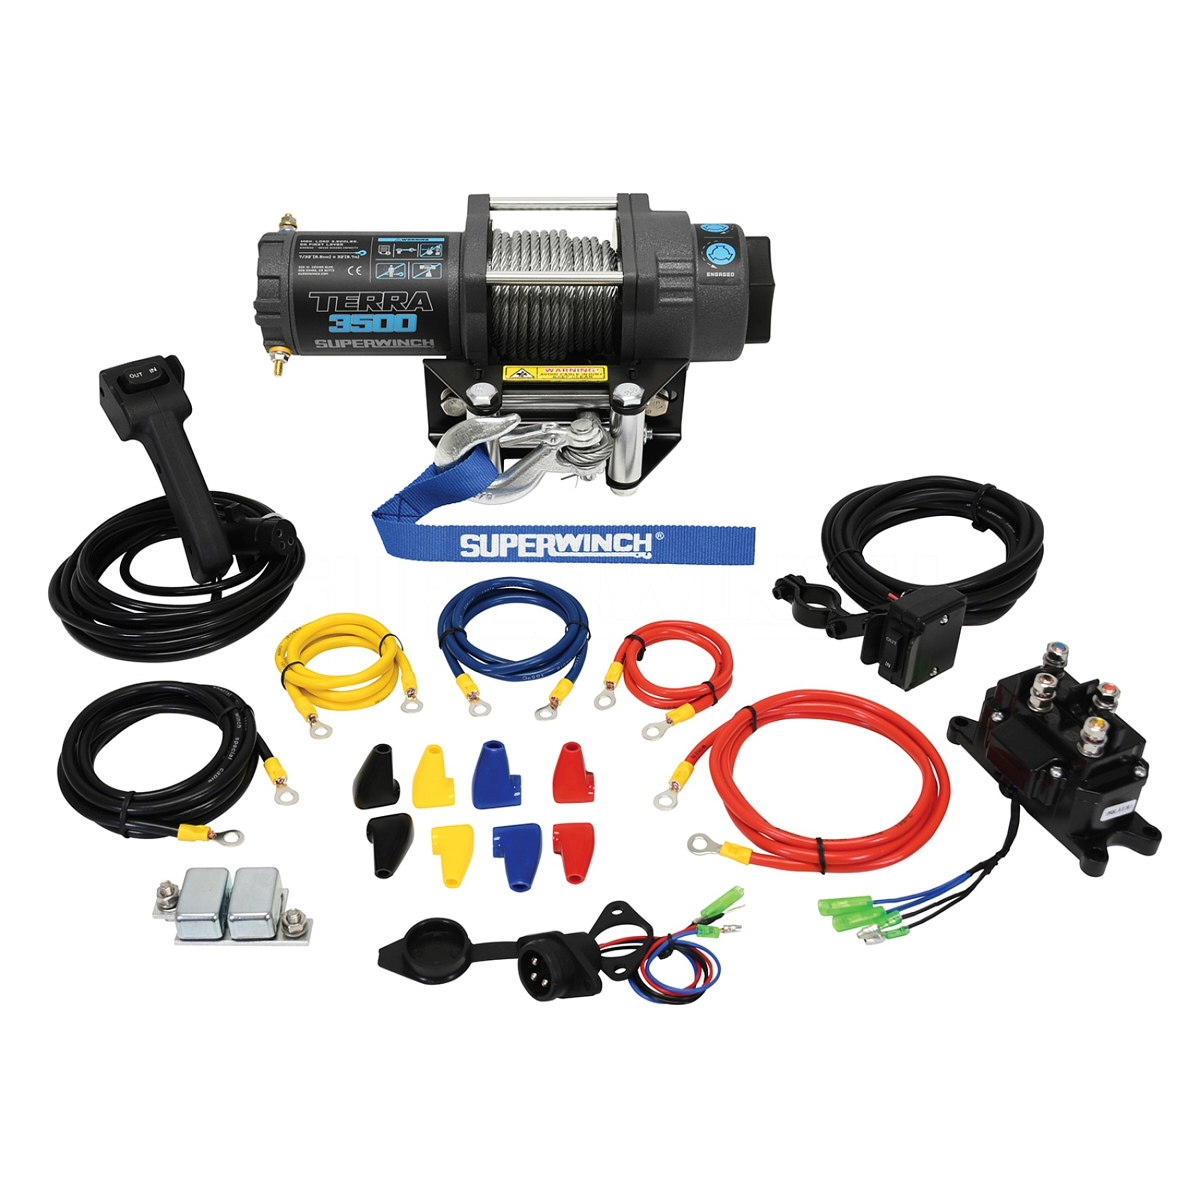 SuperWinch 1135260 Winch, Terra, 3500 lb Capacity, Roller Fairlead, 10 ft Remote, 7/32 in x 32 ft Steel Rope, 12V, Kit